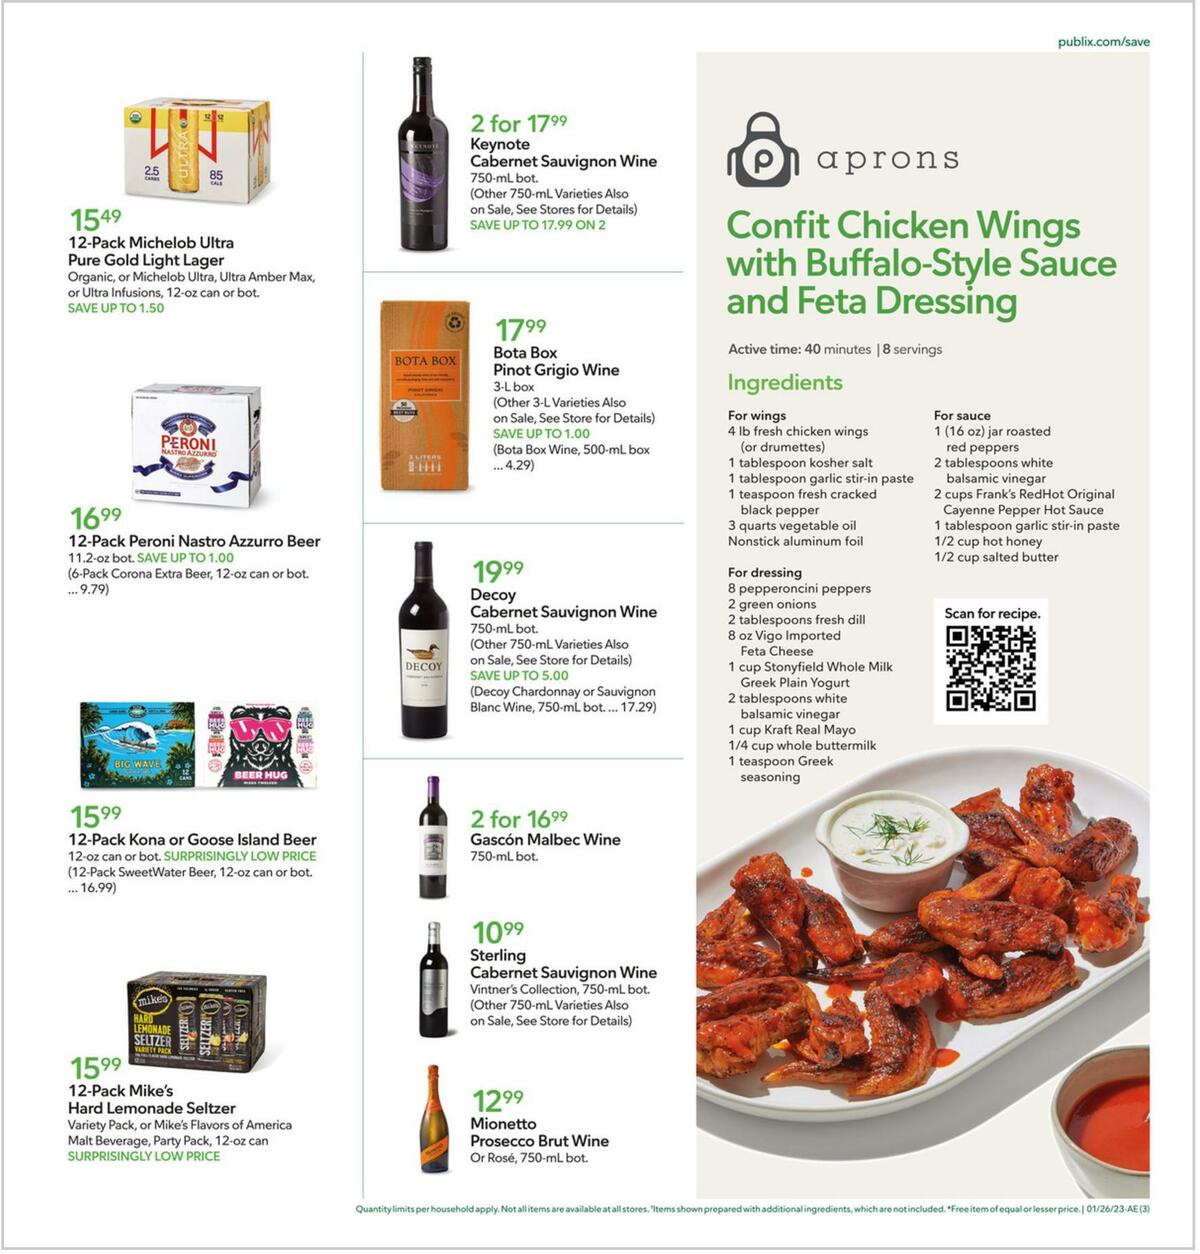 Publix Weekly Ad from January 25